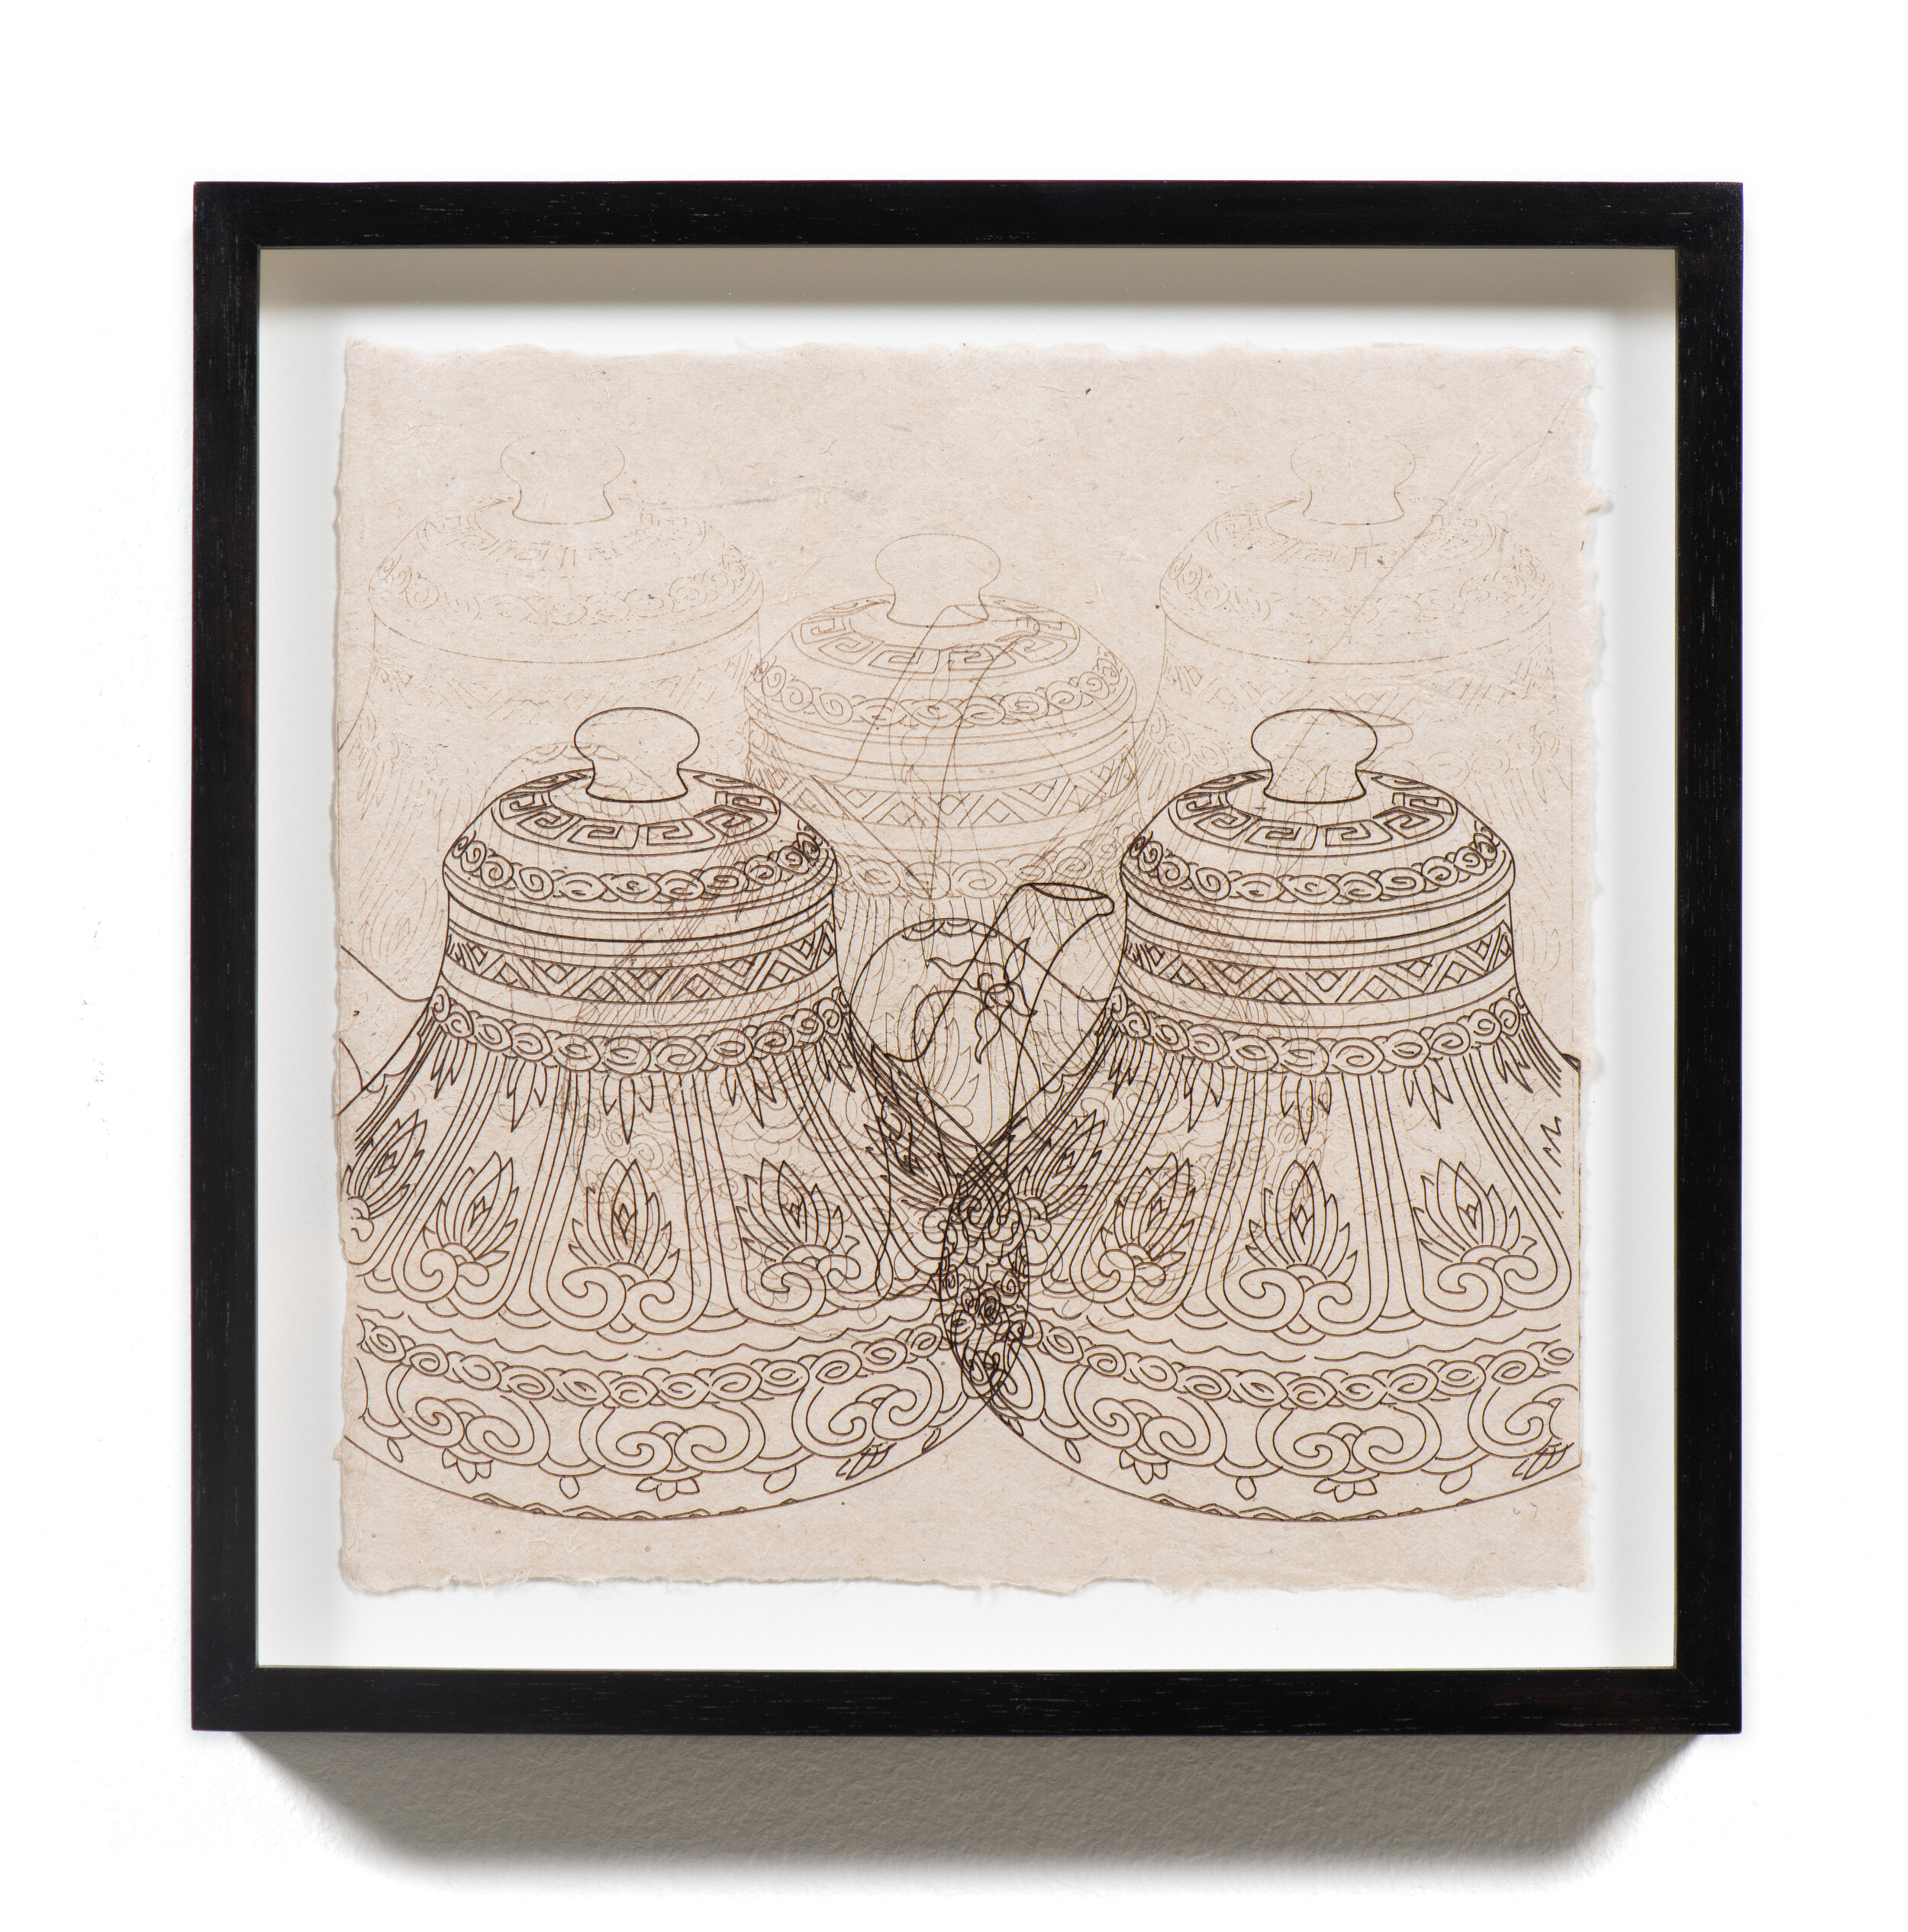   Teapots , 2021 Paper 8 3/4 x 8 3/4 x 1 1/2 inches&nbsp;(framed) 